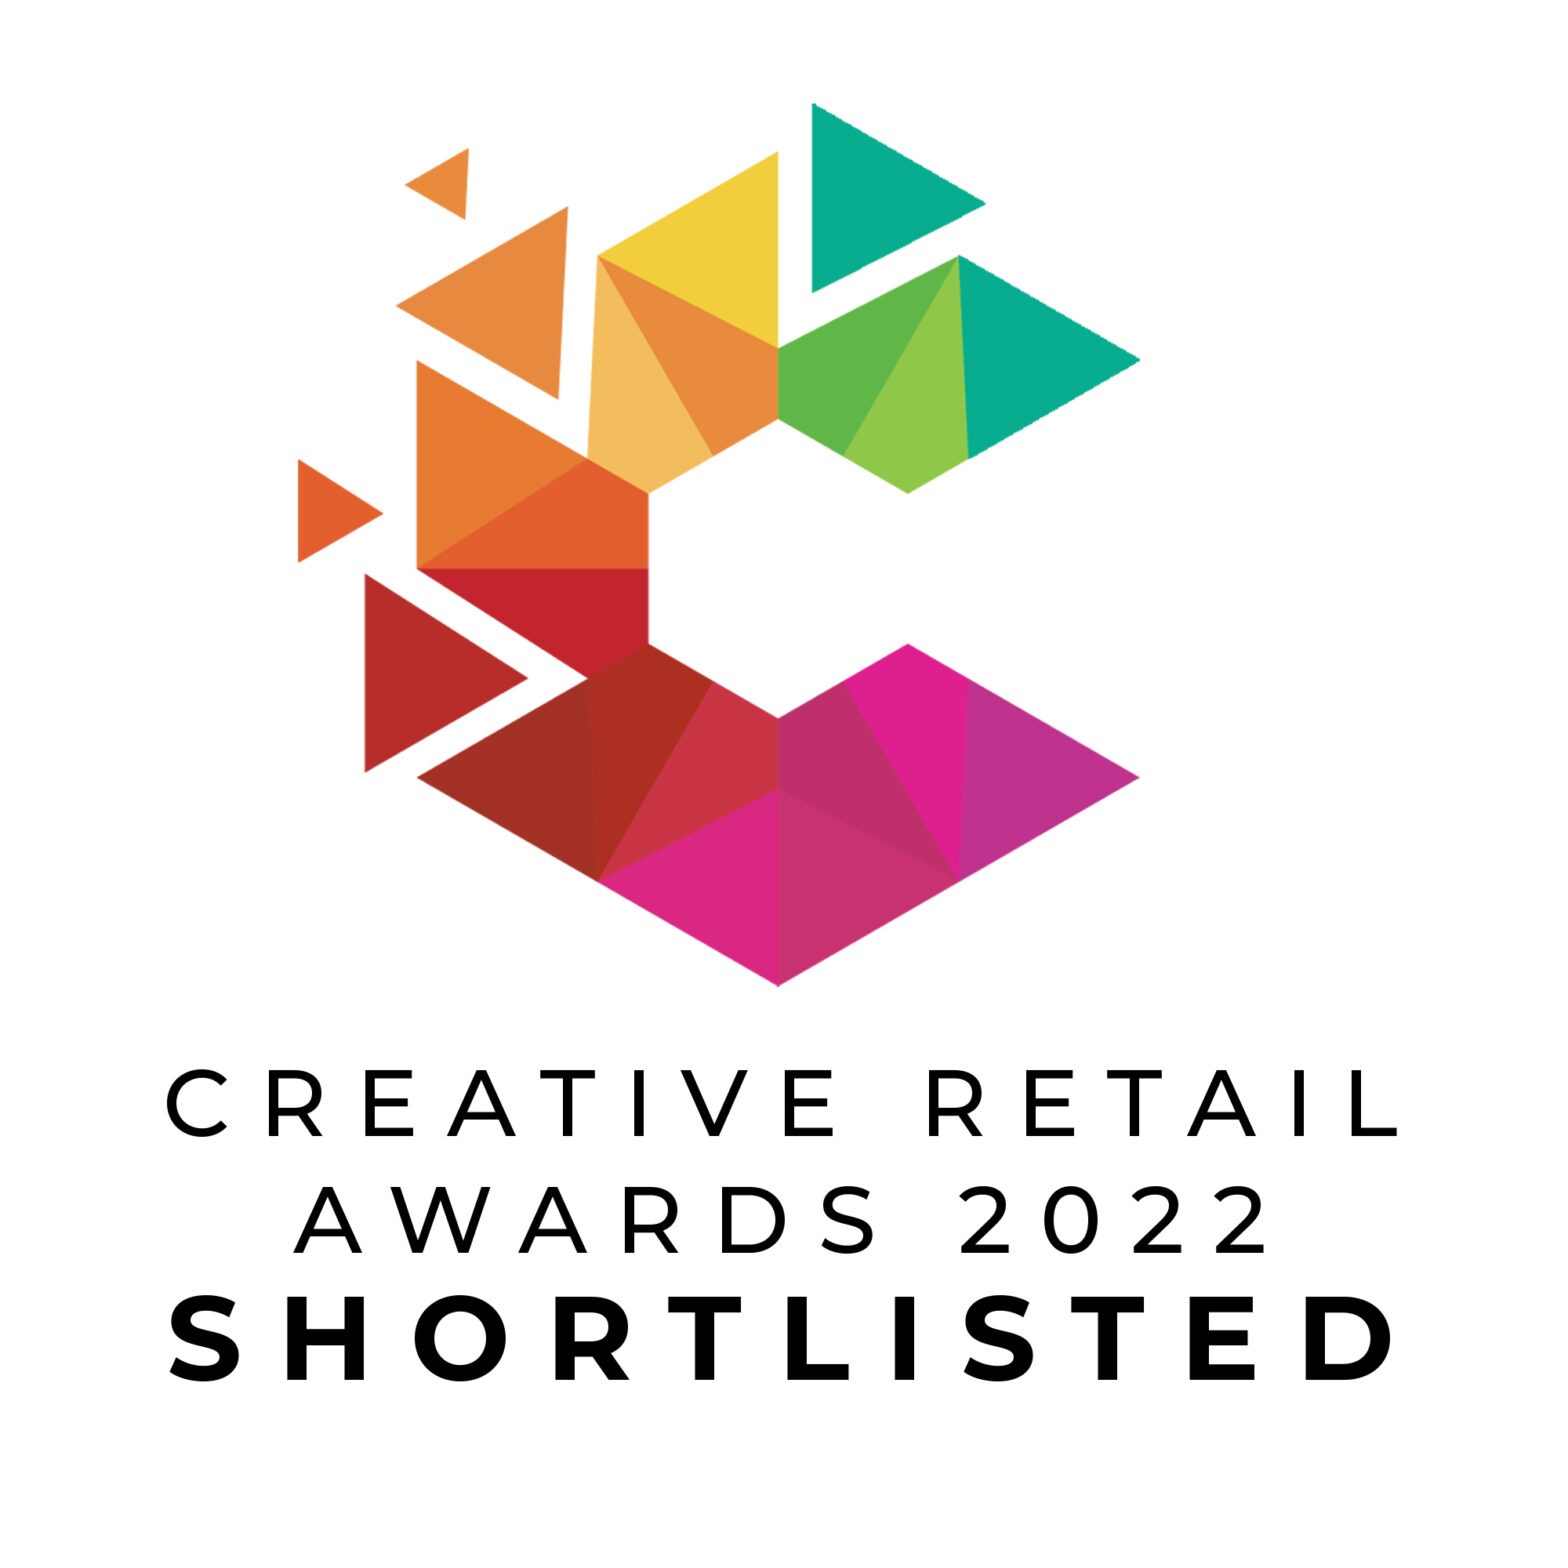 Unibox is Shortlisted for Two Creative Retail Awards!